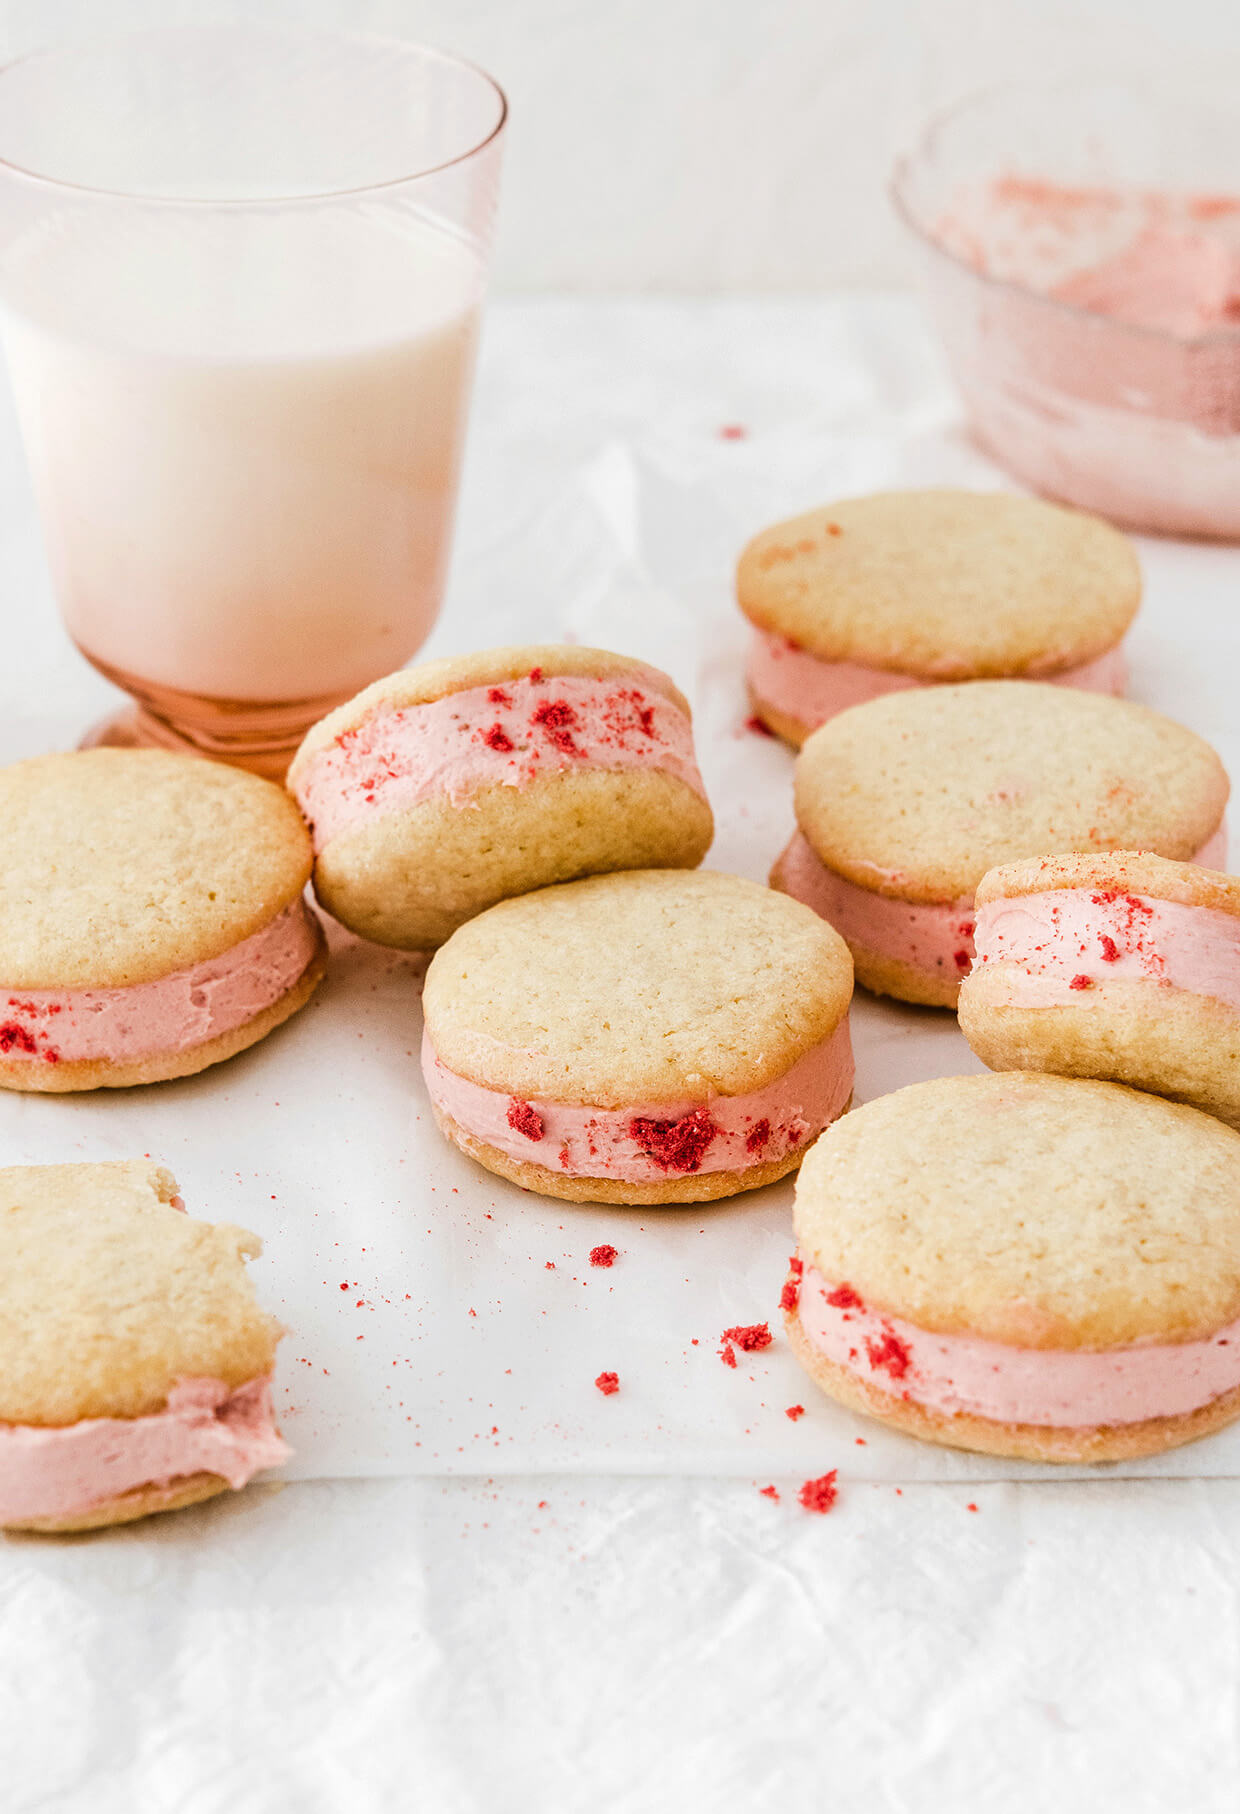 Lemon strawberry cheesecake sandwich cookies made with tub cream cheese and freeze dried strawberries, filling and easy to make, great for birthdays, parties, weddings, holidays.